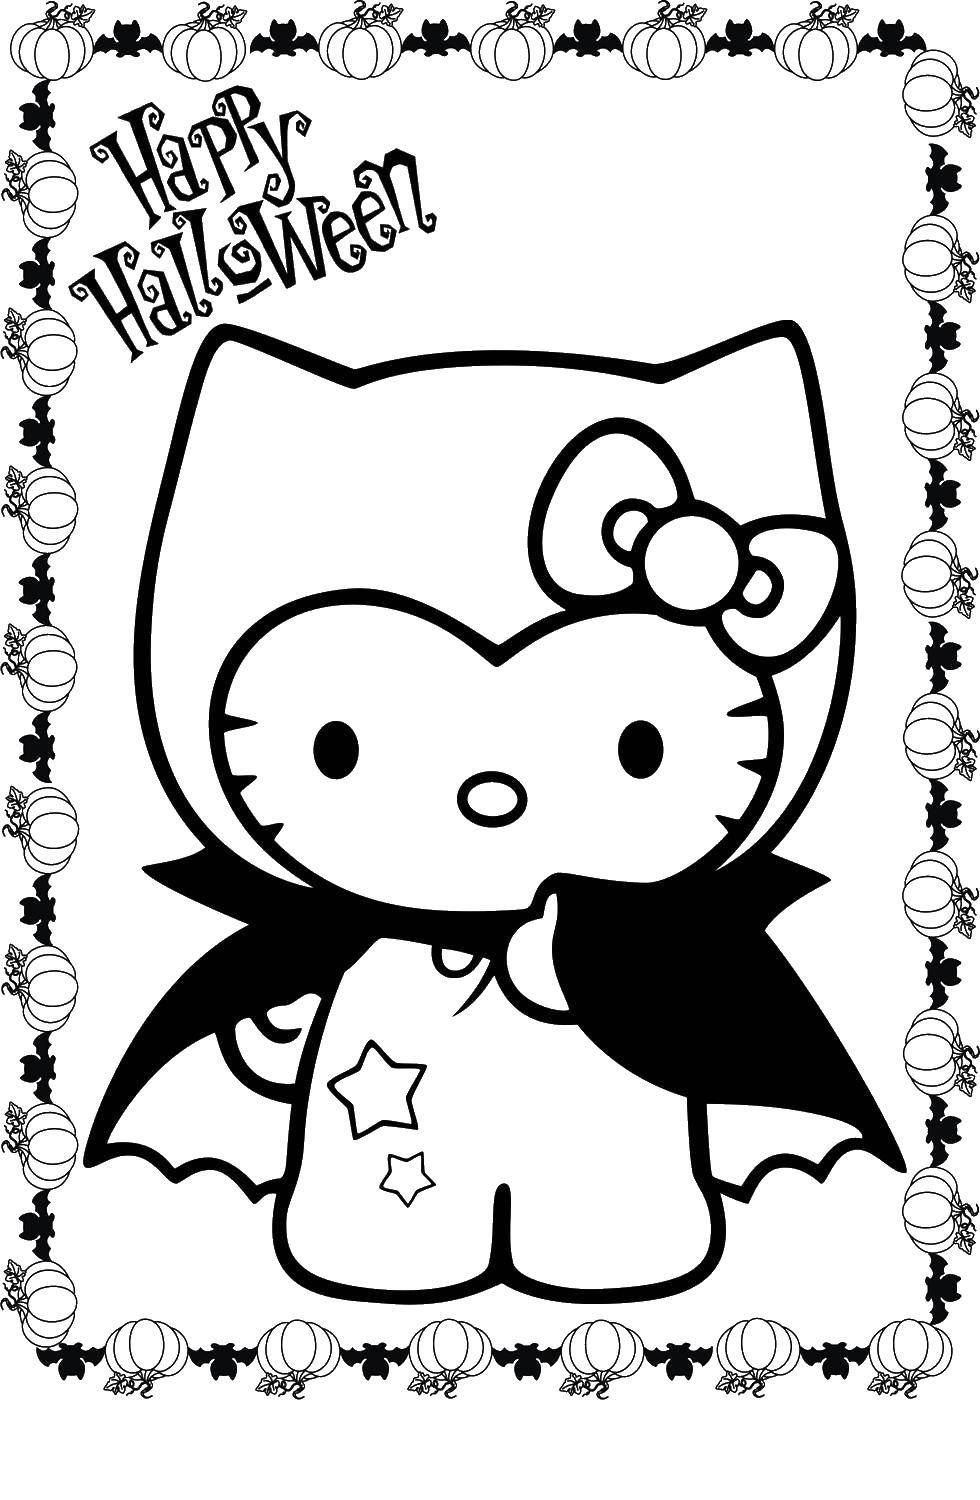 Coloring Kitty dressed as Dracula. Category Kitty . Tags:  kitty , Dracula.